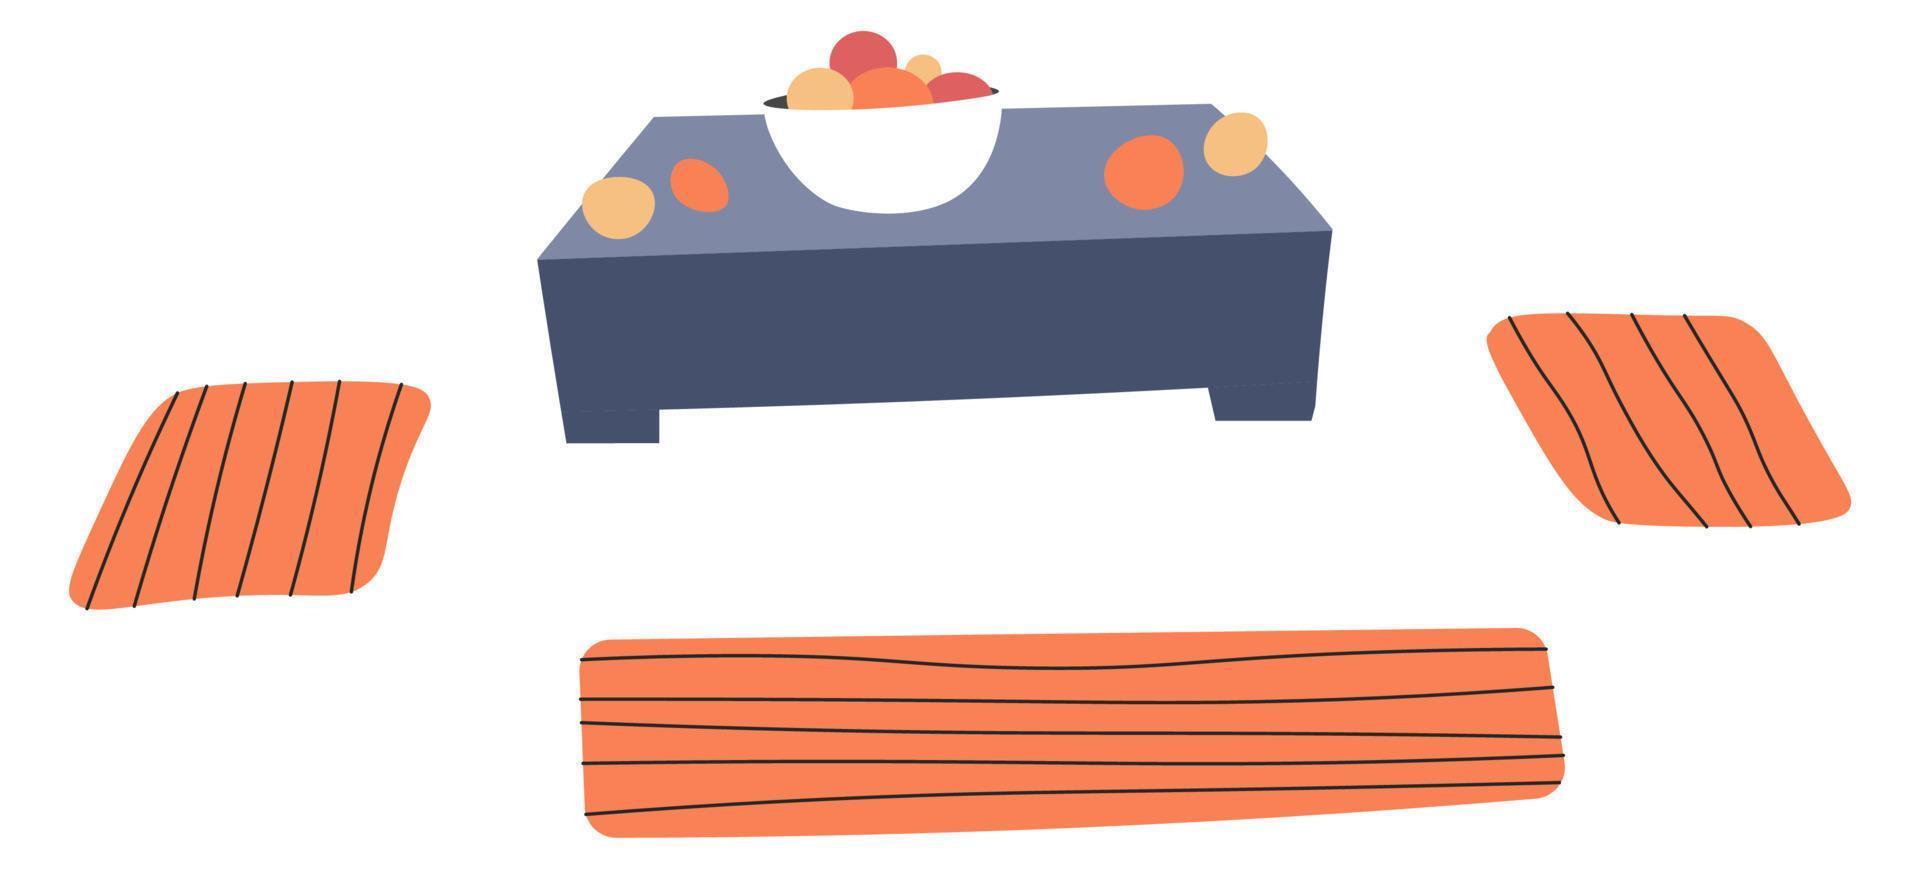 Coffee table with bowl of fruits and floor carpets vector